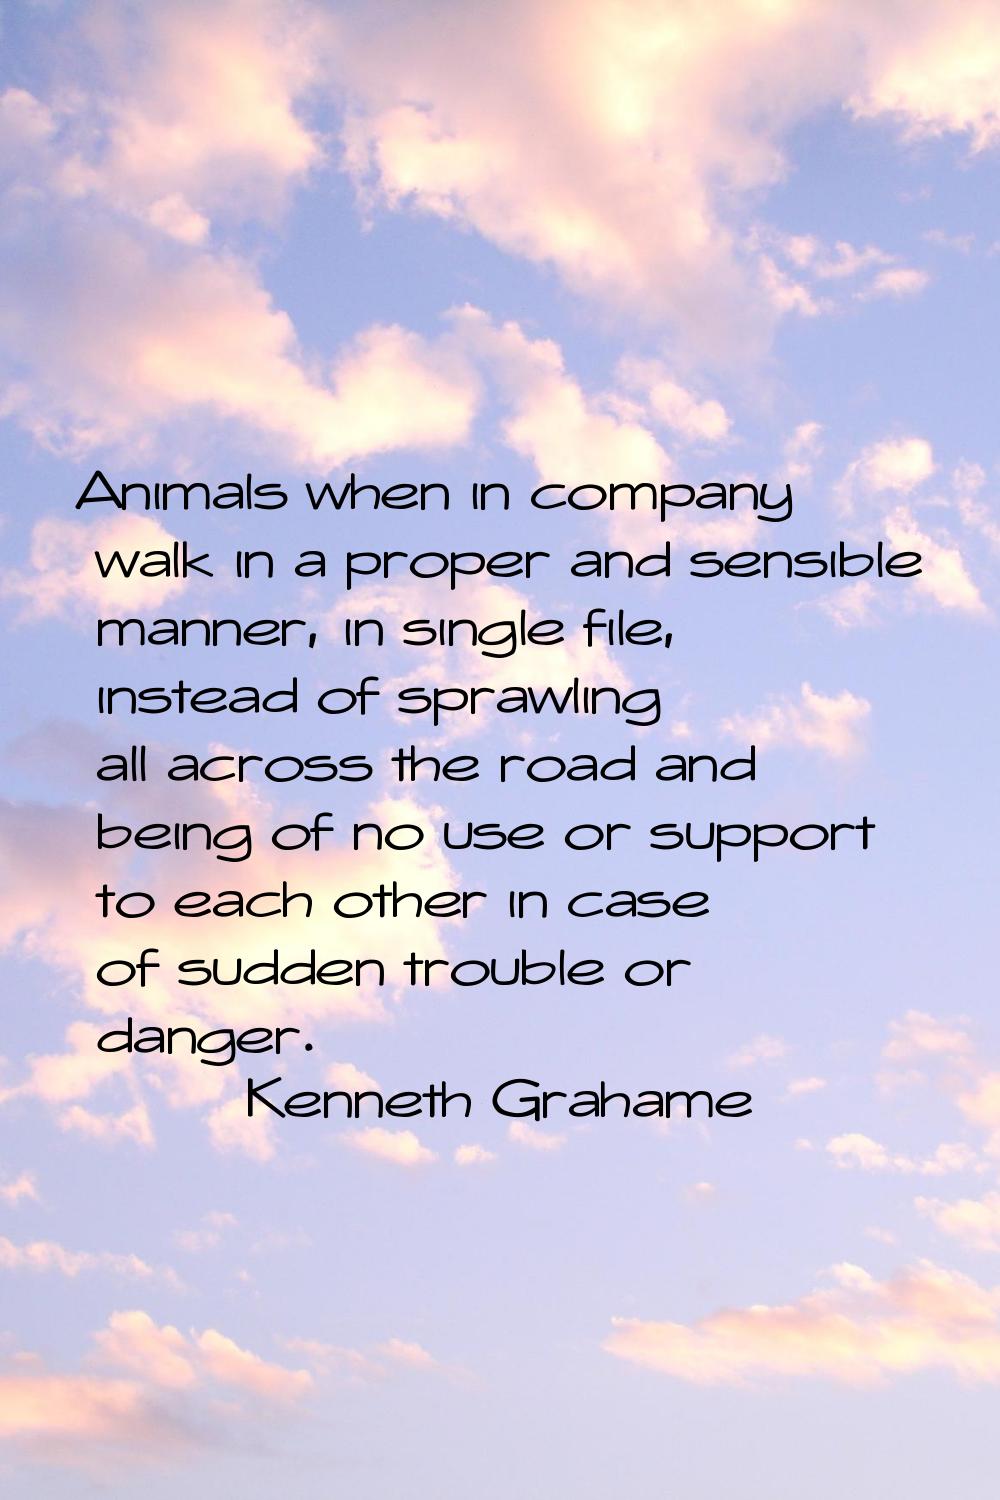 Animals when in company walk in a proper and sensible manner, in single file, instead of sprawling 